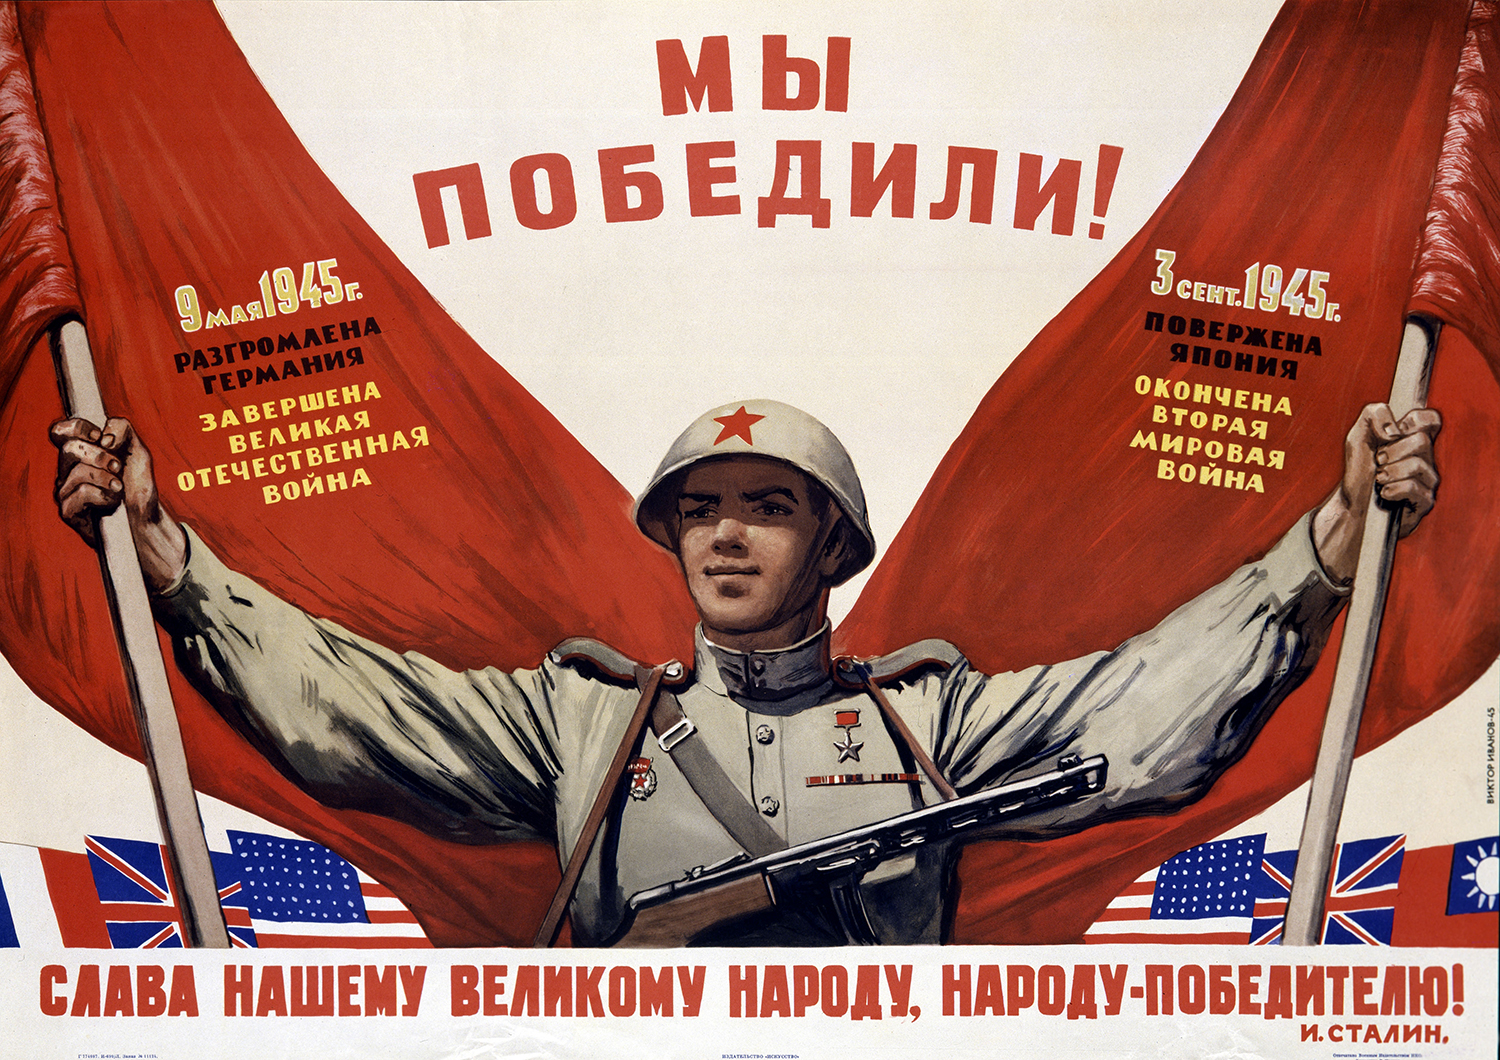 soviet foreign policy before world war two the second world war